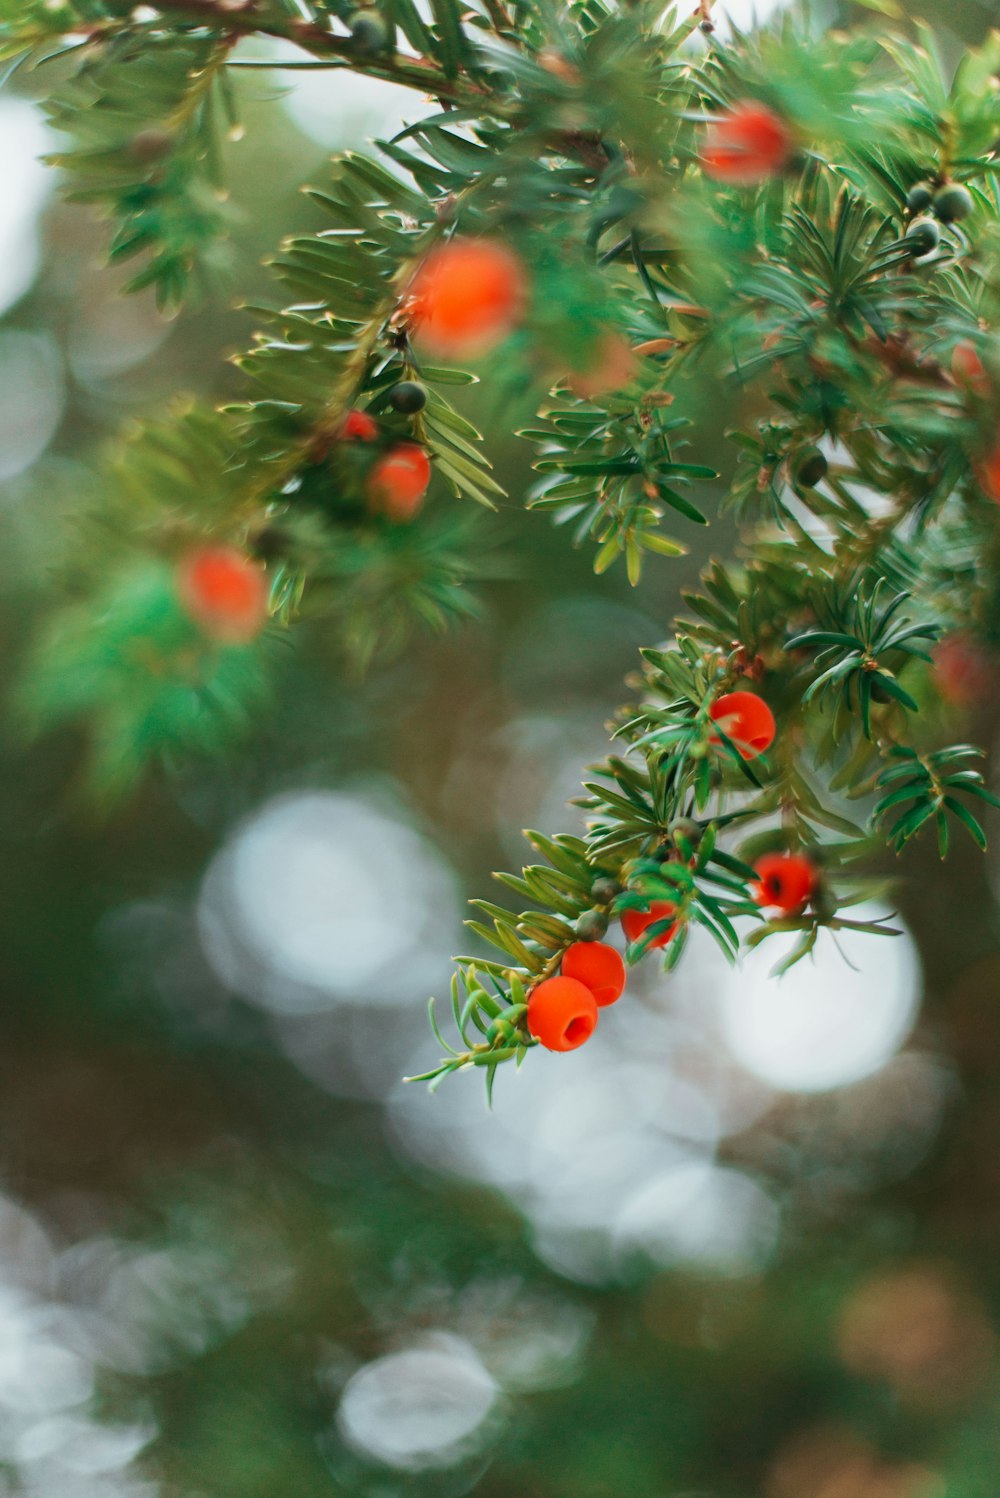 red and white round fruits on green tree